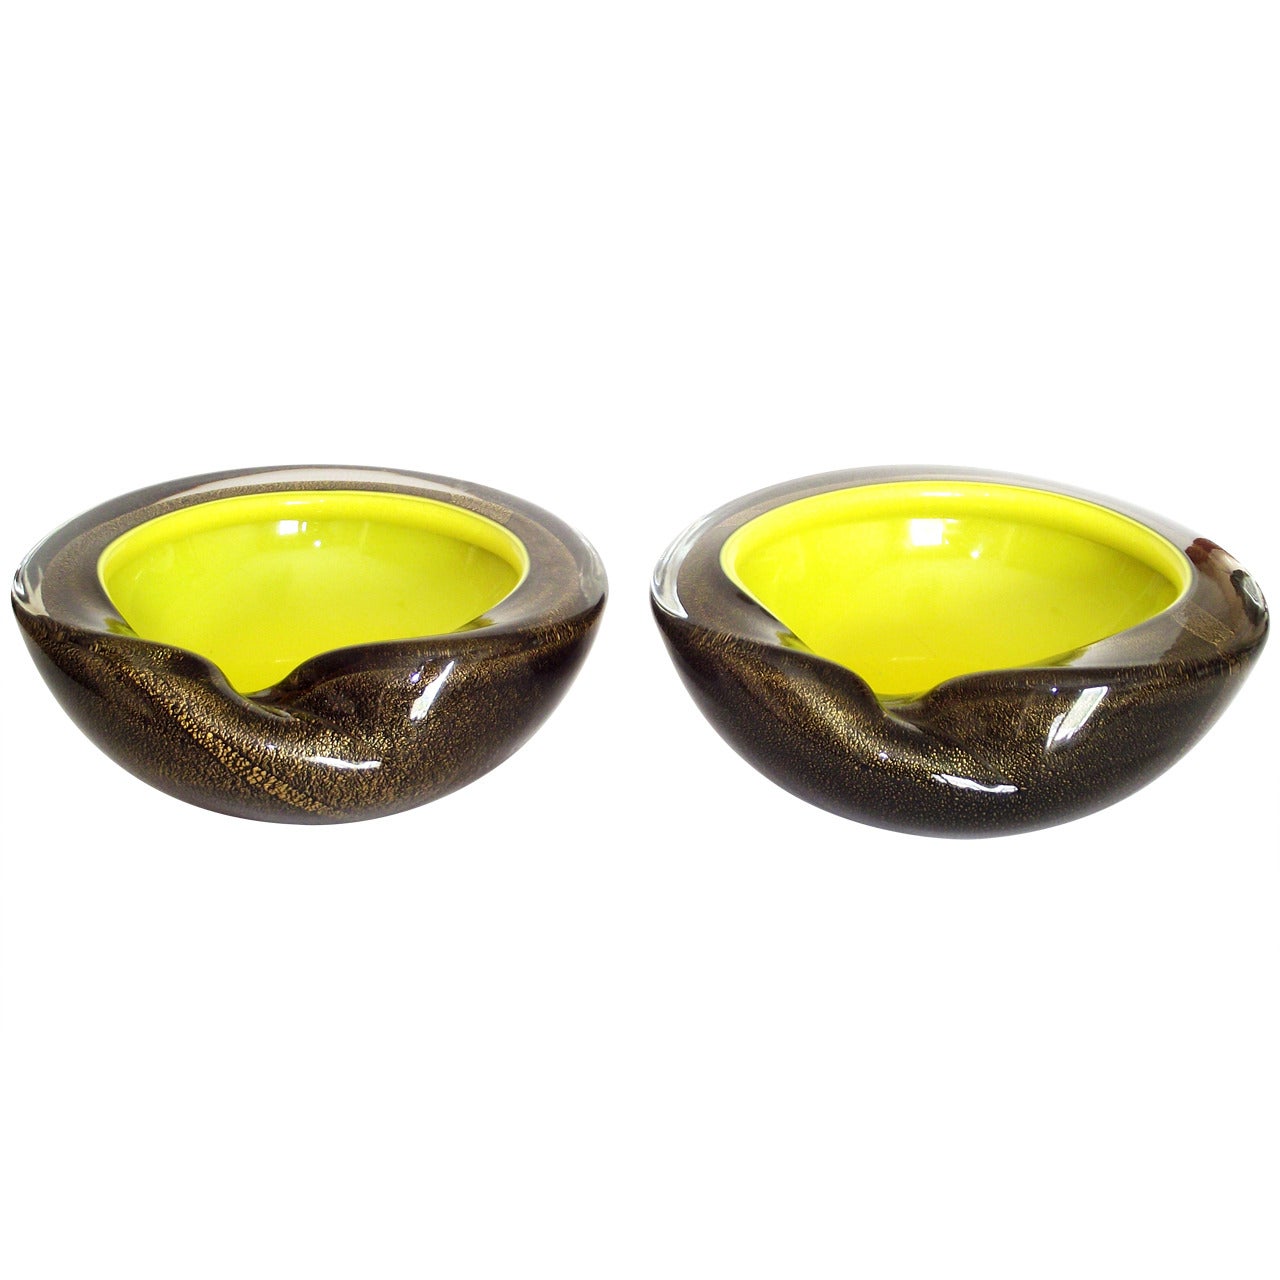 Pair of Cased Murano Glass Bowls in Yellow and Gold by Alfredo Barbini